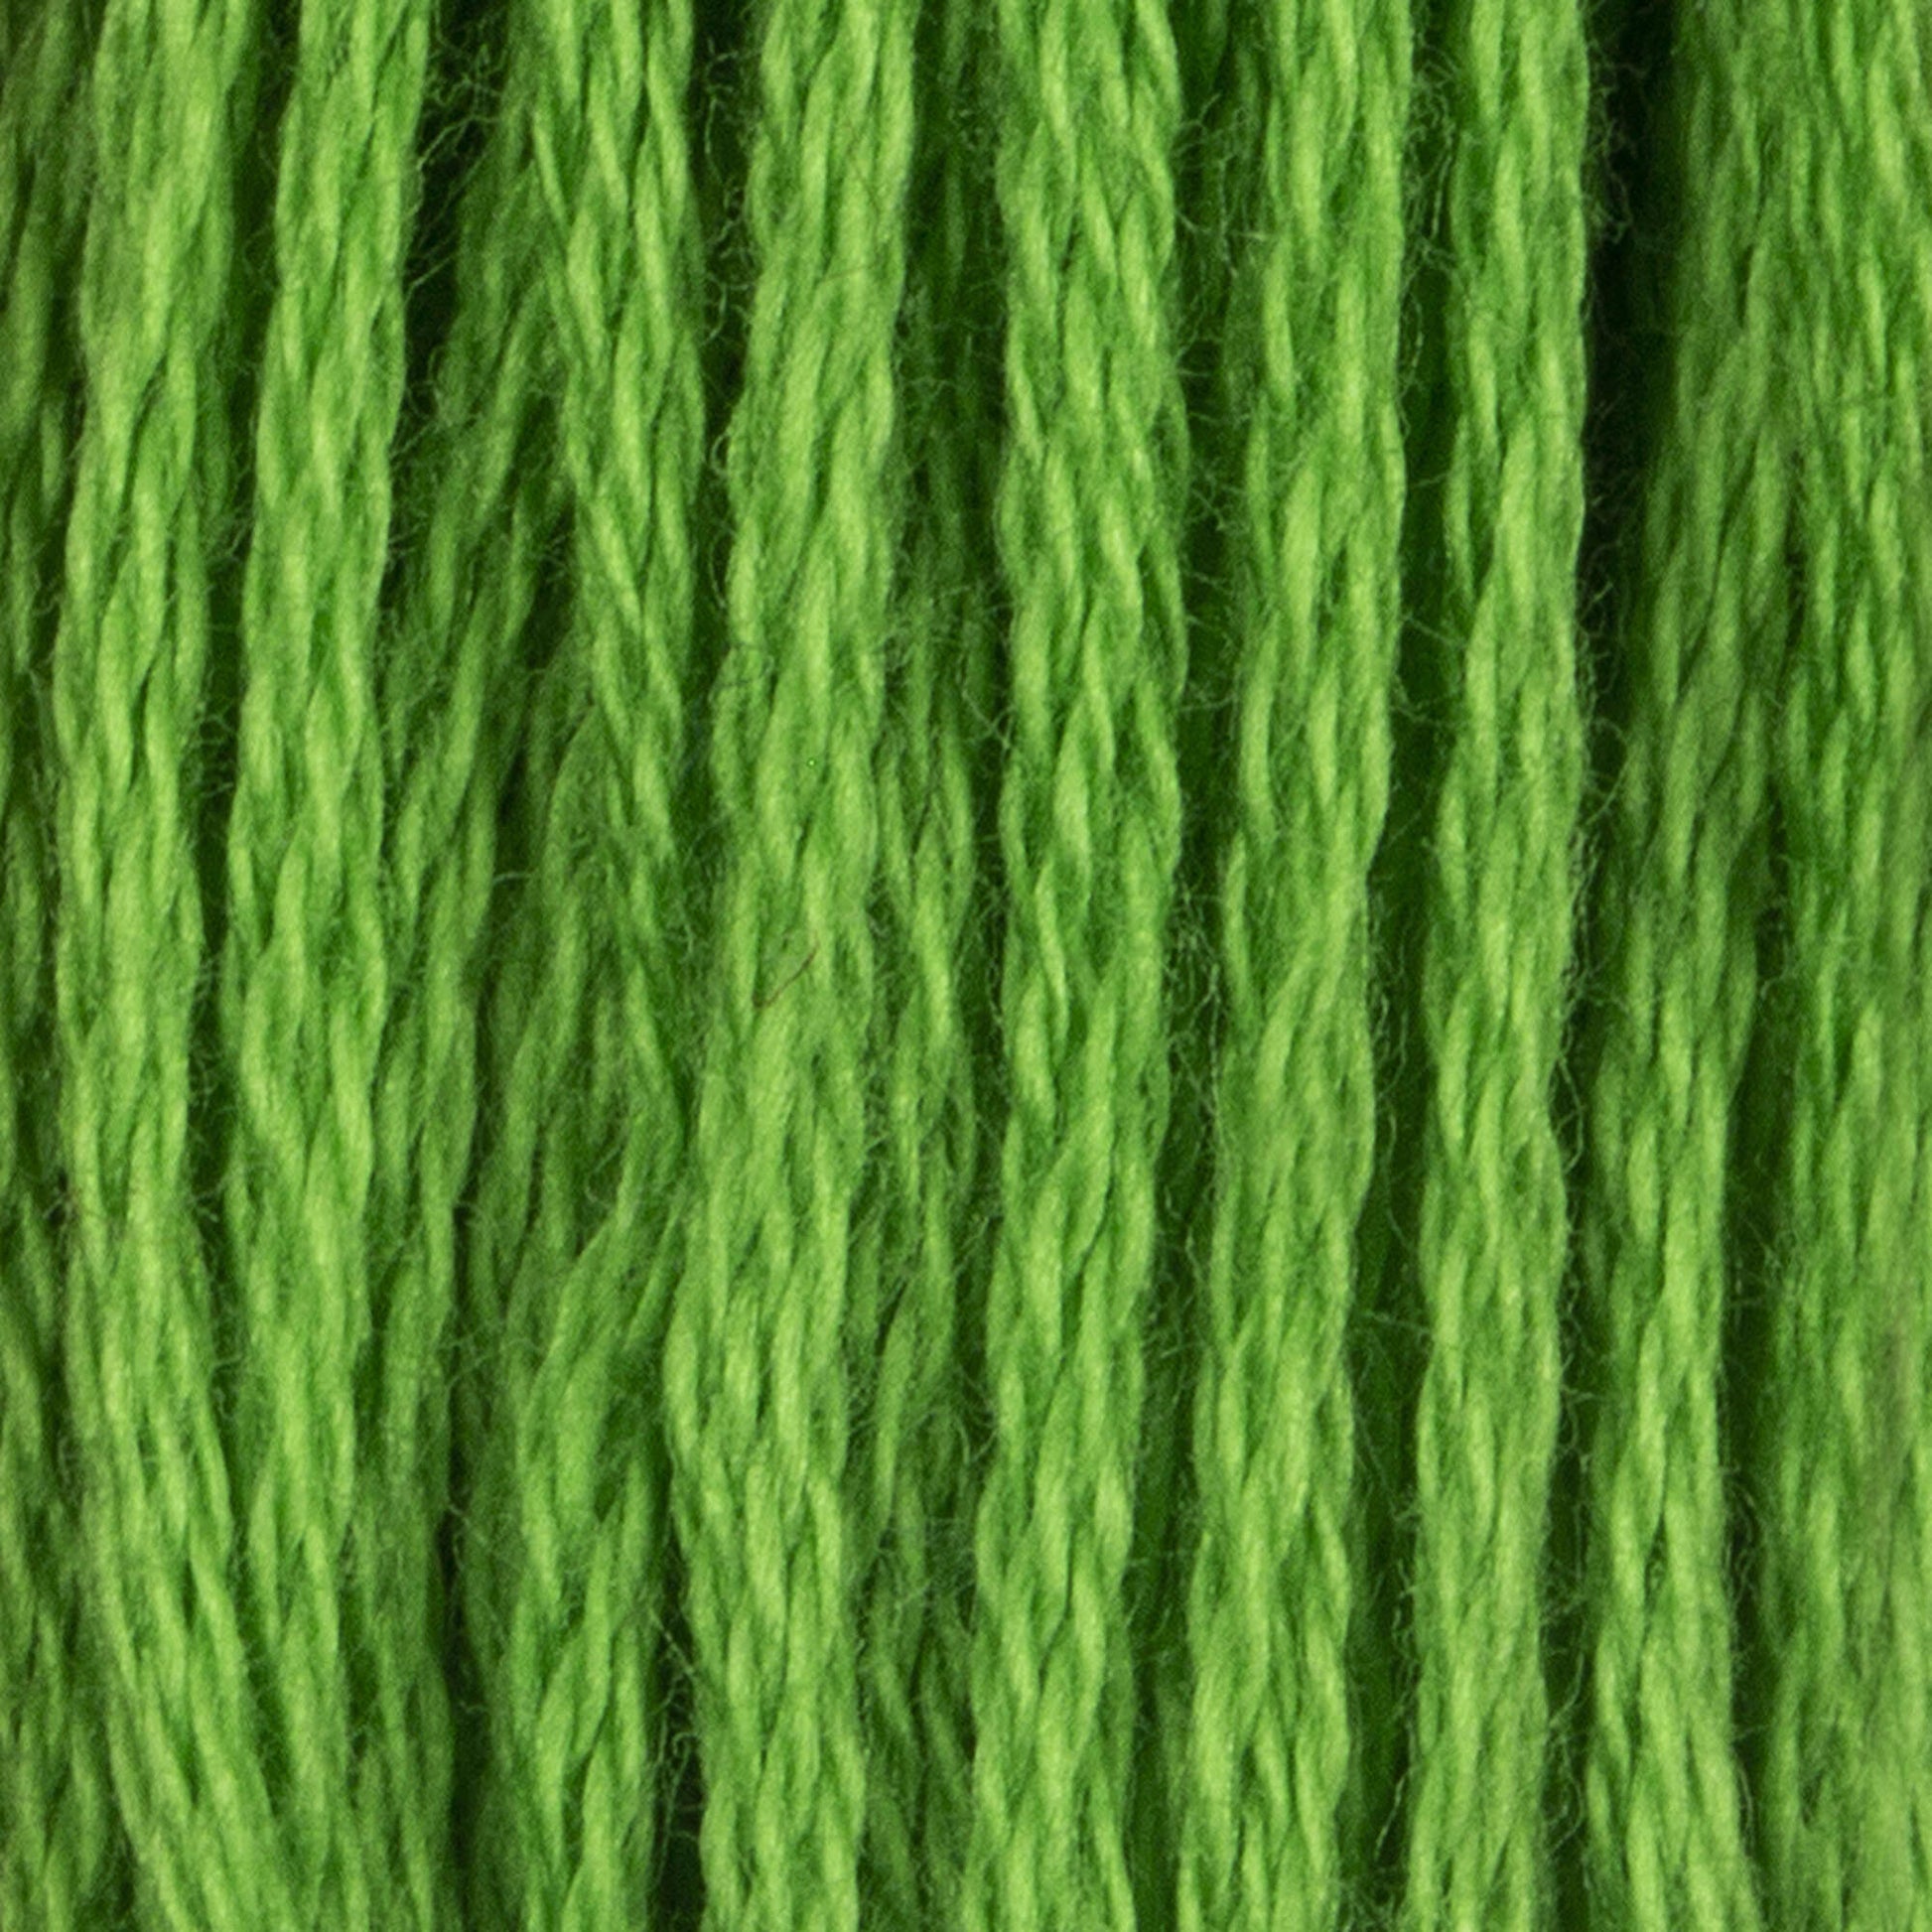 Coats & Clark Cotton Embroidery Floss Chartreuse Bright